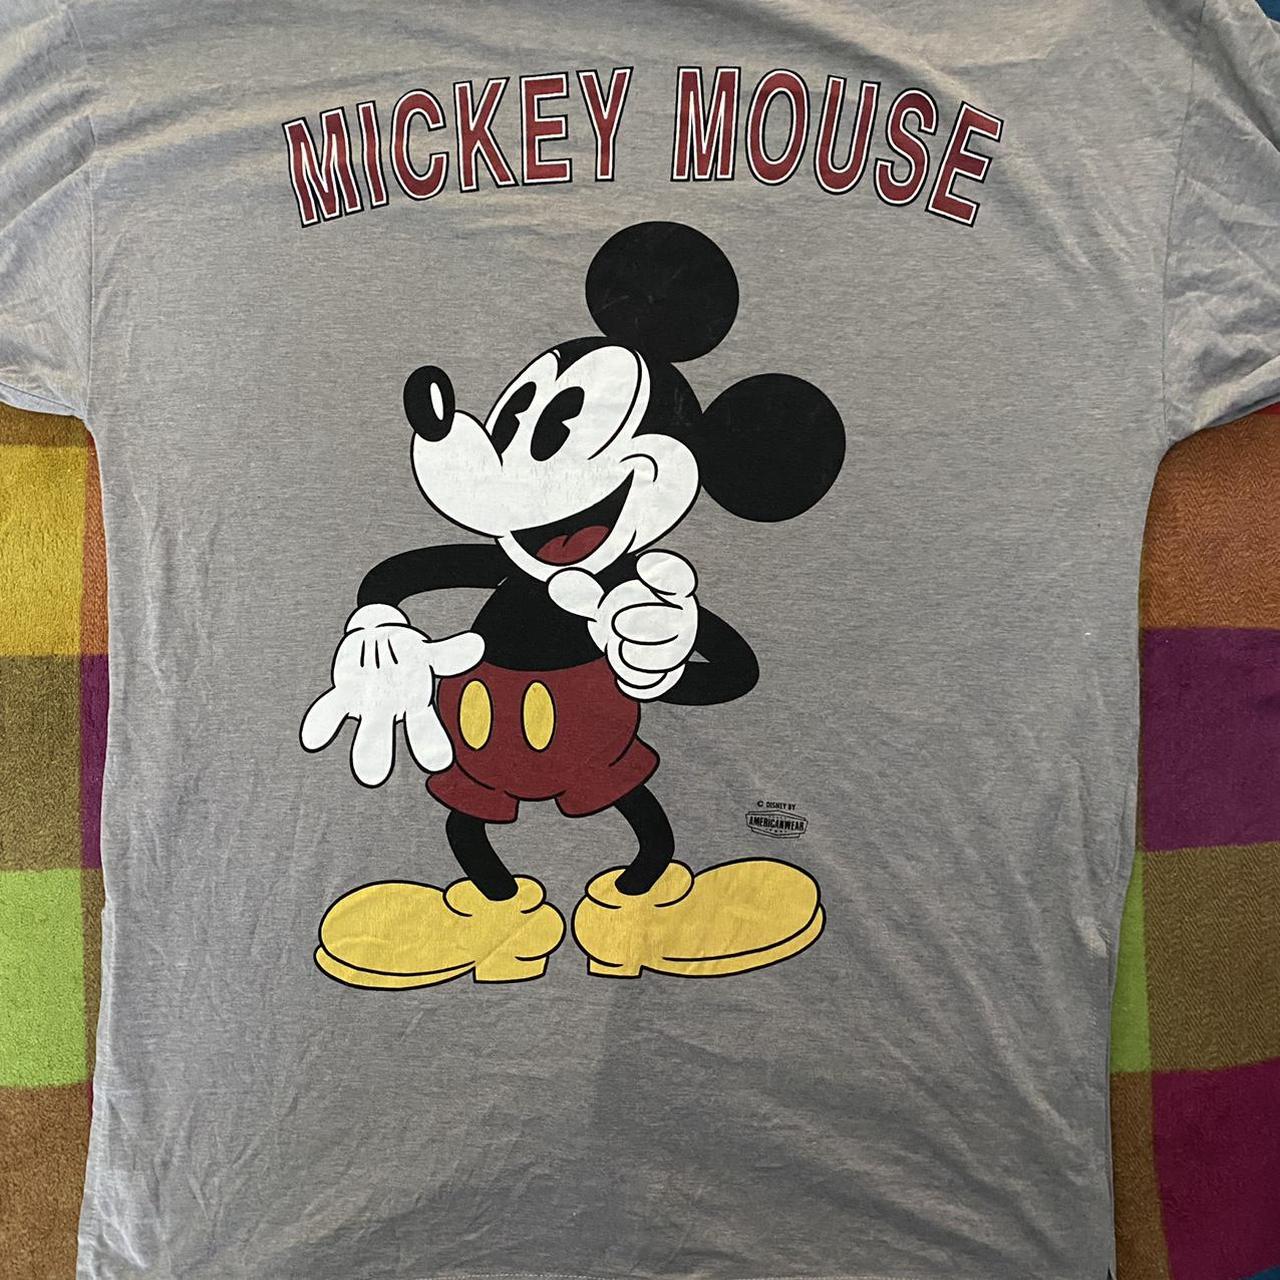 Product Image 3 - Vintage Disney Mickey Mouse short